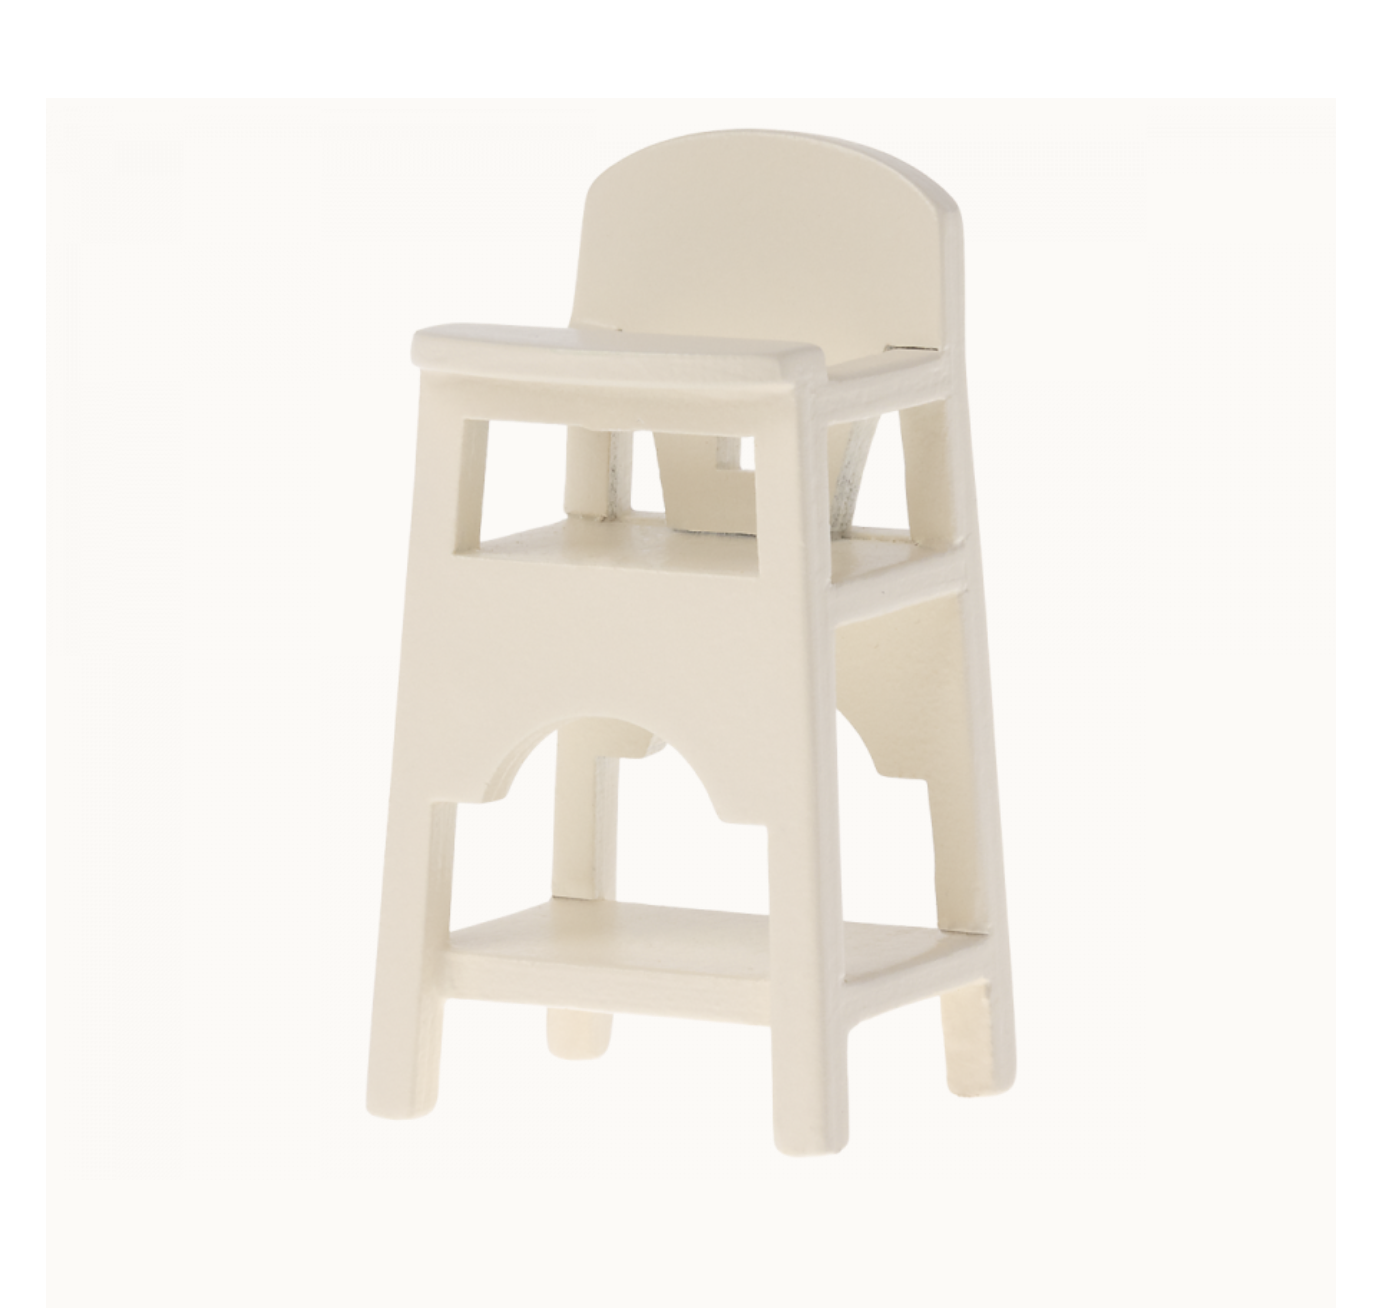 Maileg - High chair, Mouse - Off white